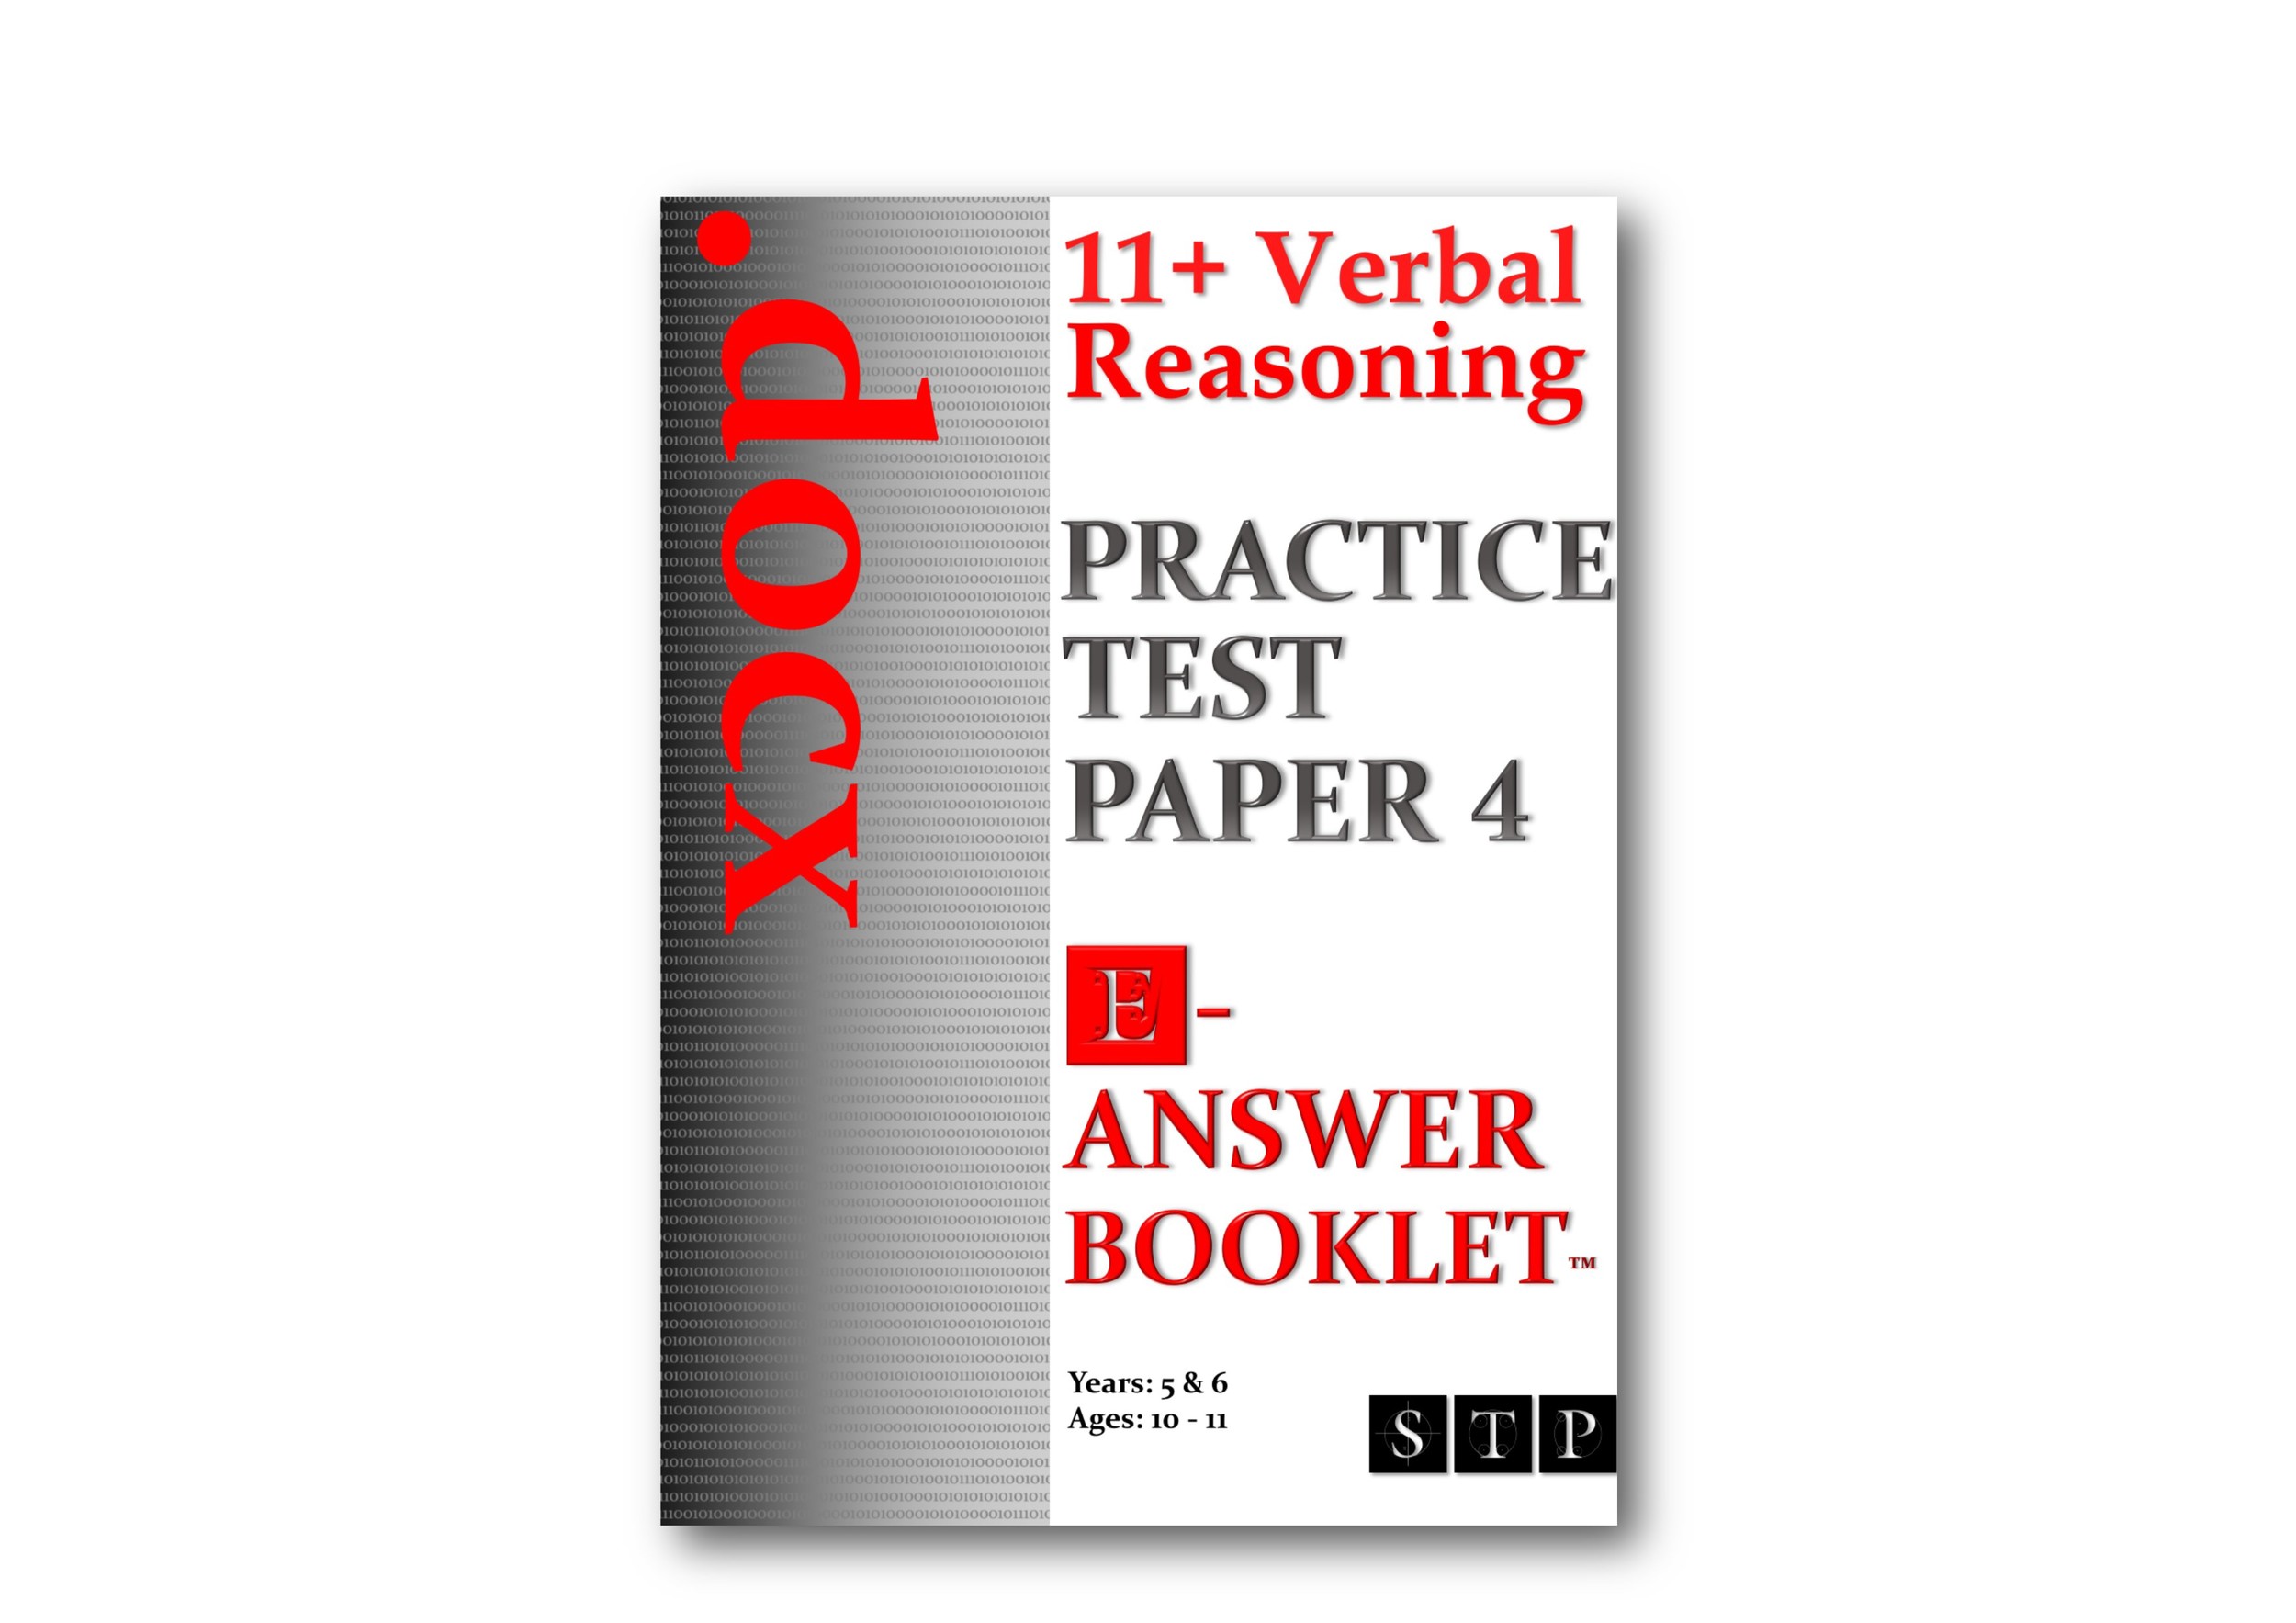 11+ Verbal Reasoning Practice Test Paper 4 (E-Answer Booklet).jpg